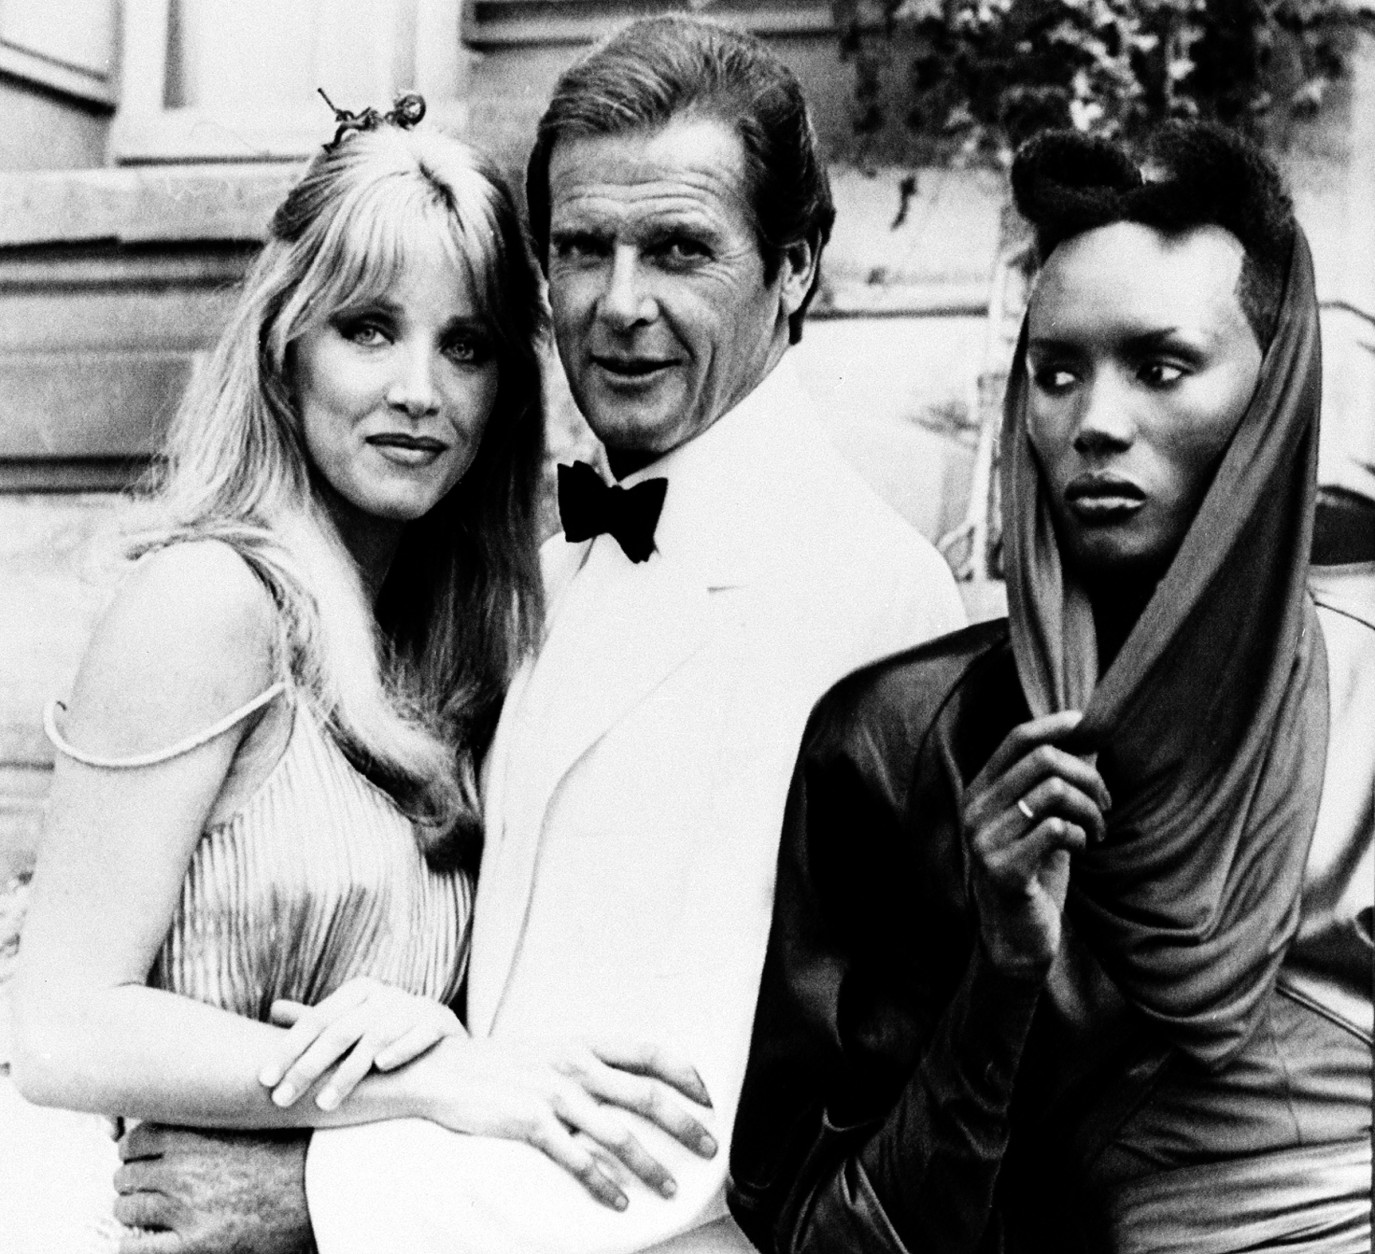 FILE - In this Aug. 17, 1984 file photo, actor Roger Moore, alias British secret agent James Bond, is seen with his co-stars Tanya Roberts, and Grace Jones, right, in front of Chateau de Chantilly, on the set of the 007 action film "A View to a Kill," near Paris, France. (AP Photo/Alexis Duclos, File)